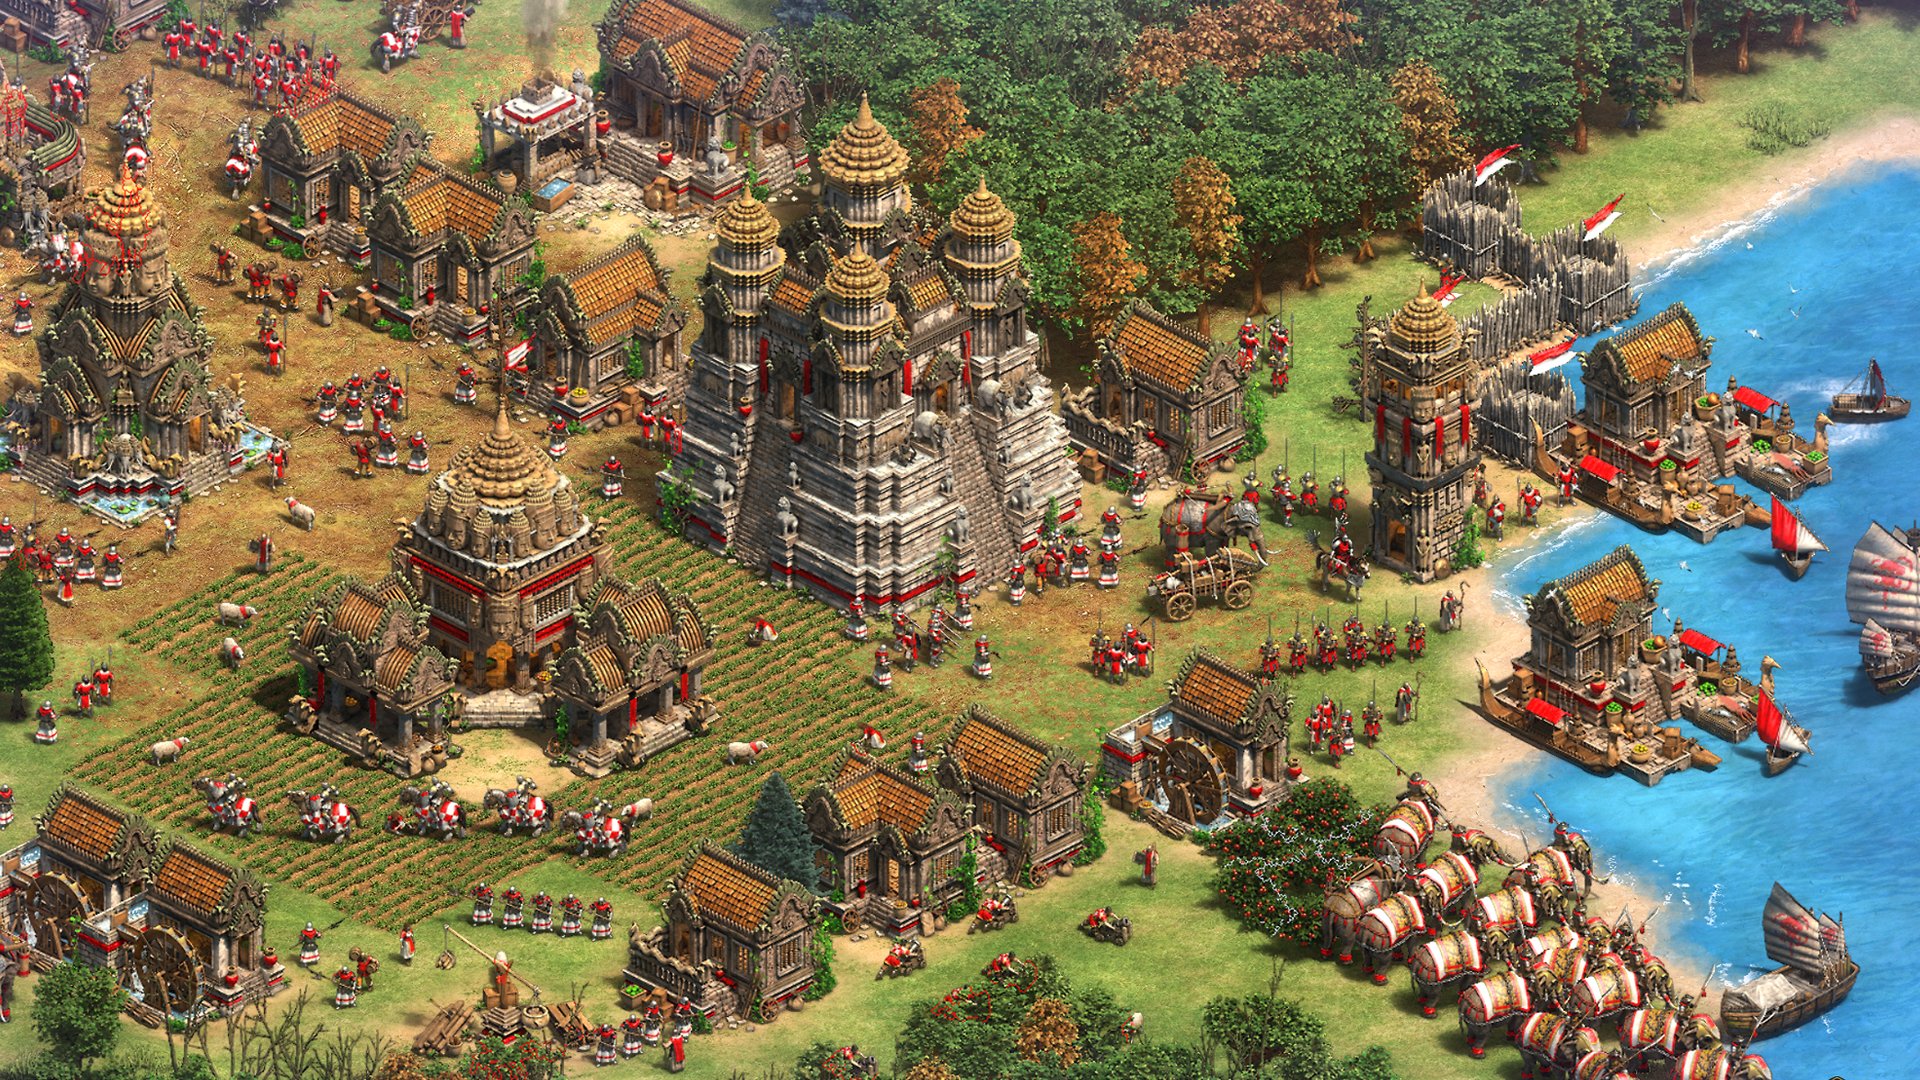 6. "Microsoft has partnered with Mogul for Age of Empires II: Definiti...